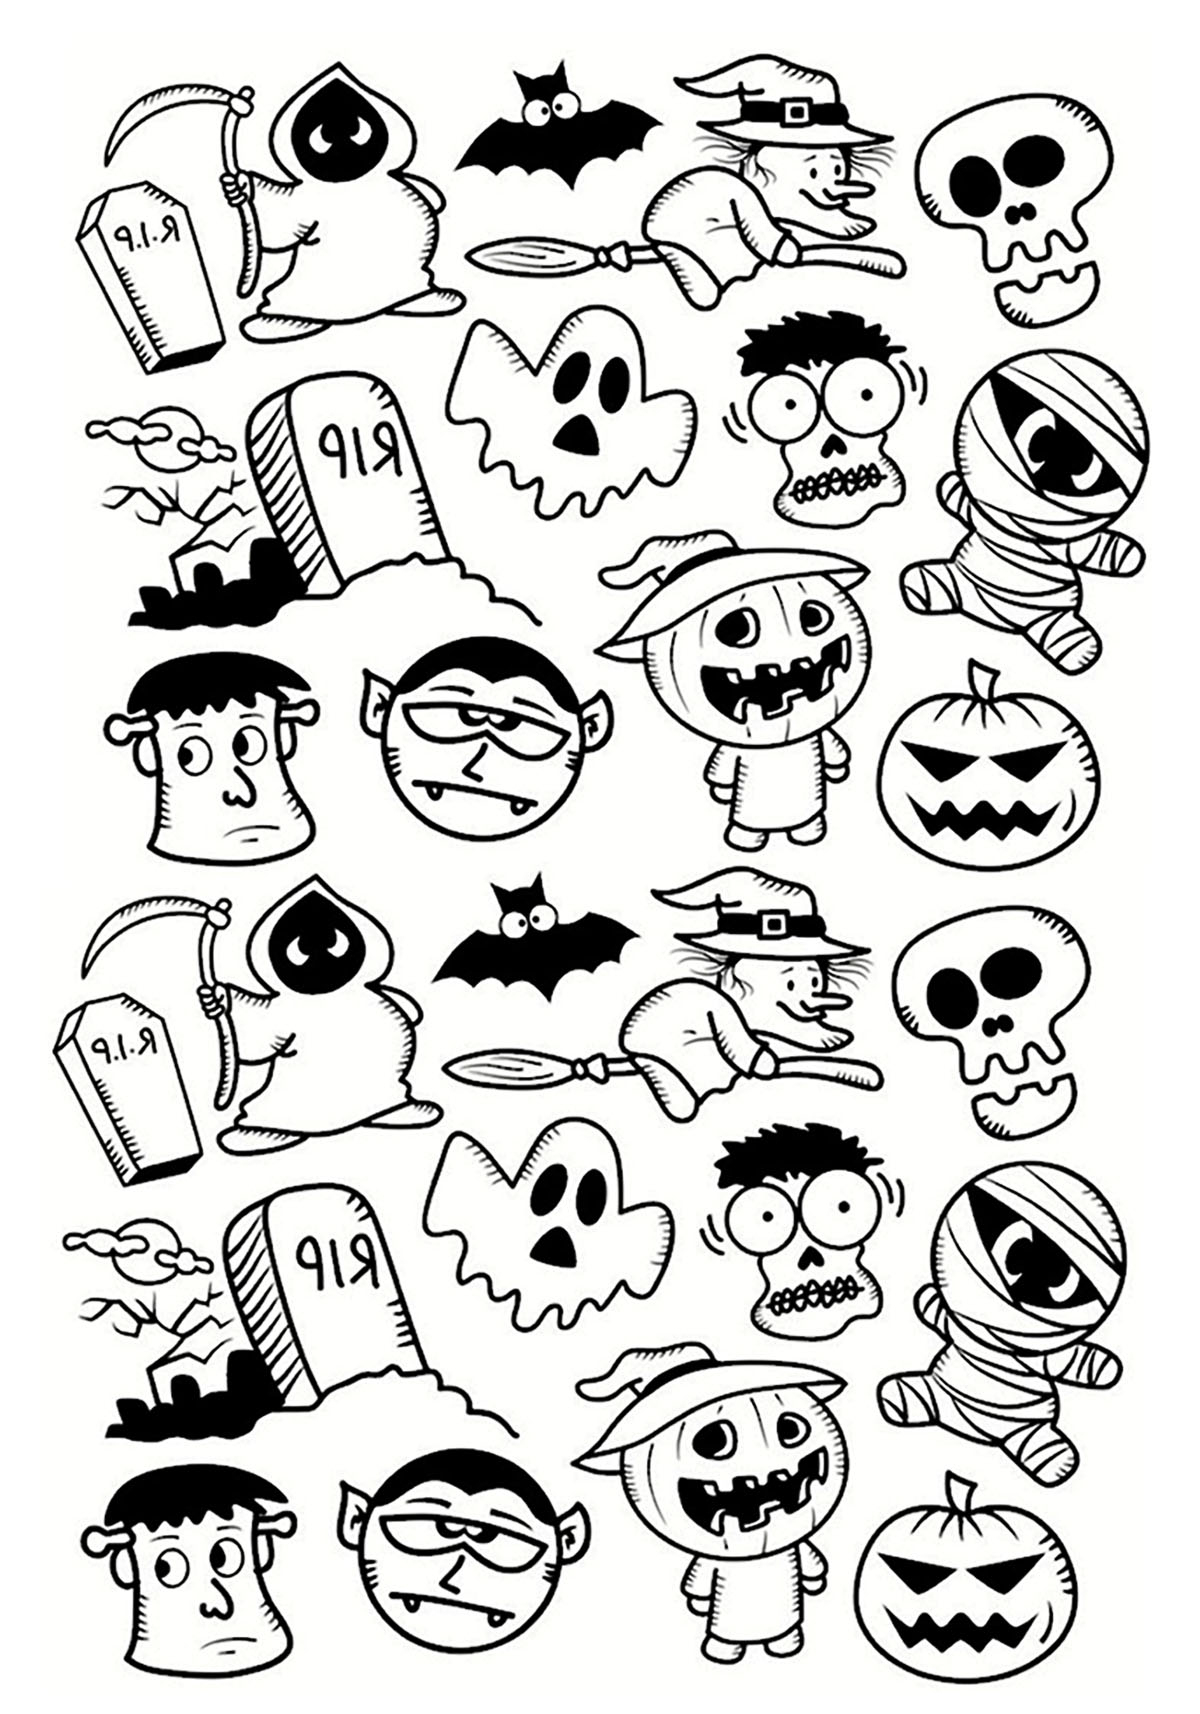 Pumkin - Coloring Pages For Adults dedans Halloween Dessin Images